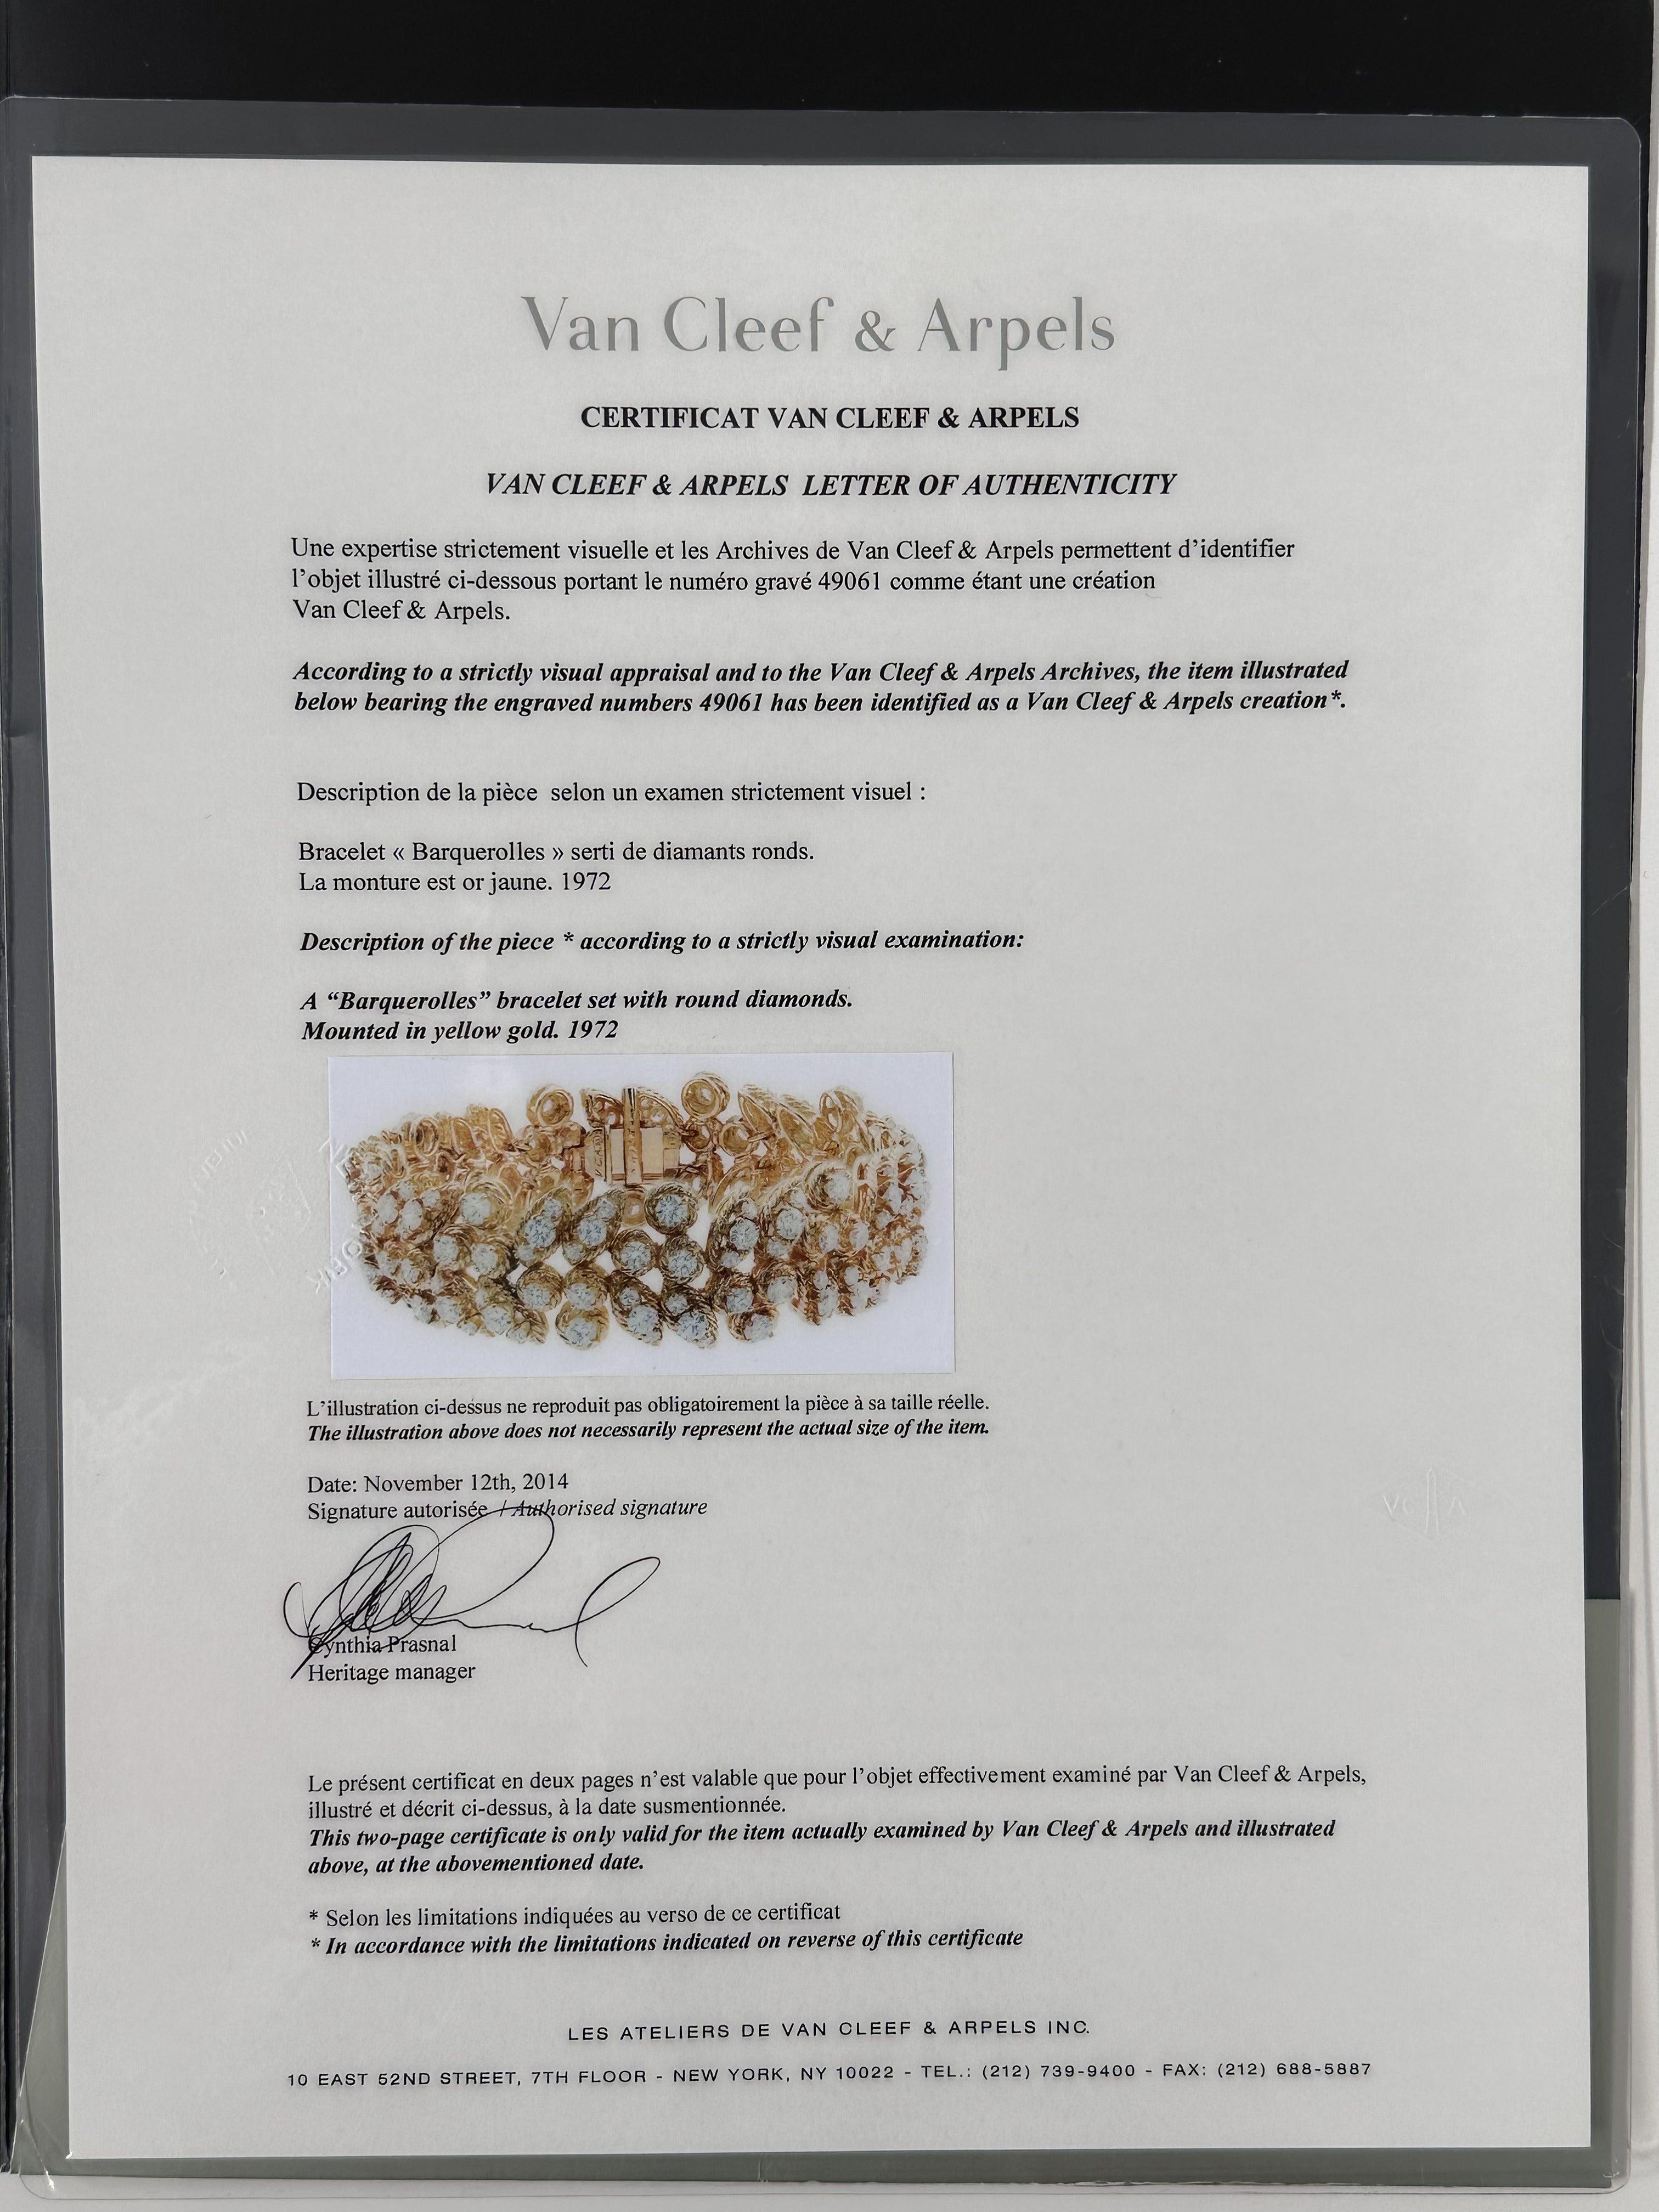 Van Cleef & Arpels 1972 Barquerolles Bracelet

Additional information:
Colour: Gold
Condition: Excellent
Condition detail: This item has been used and may have some minor flaws. Before purchasing, please refer to the images for the exact condition